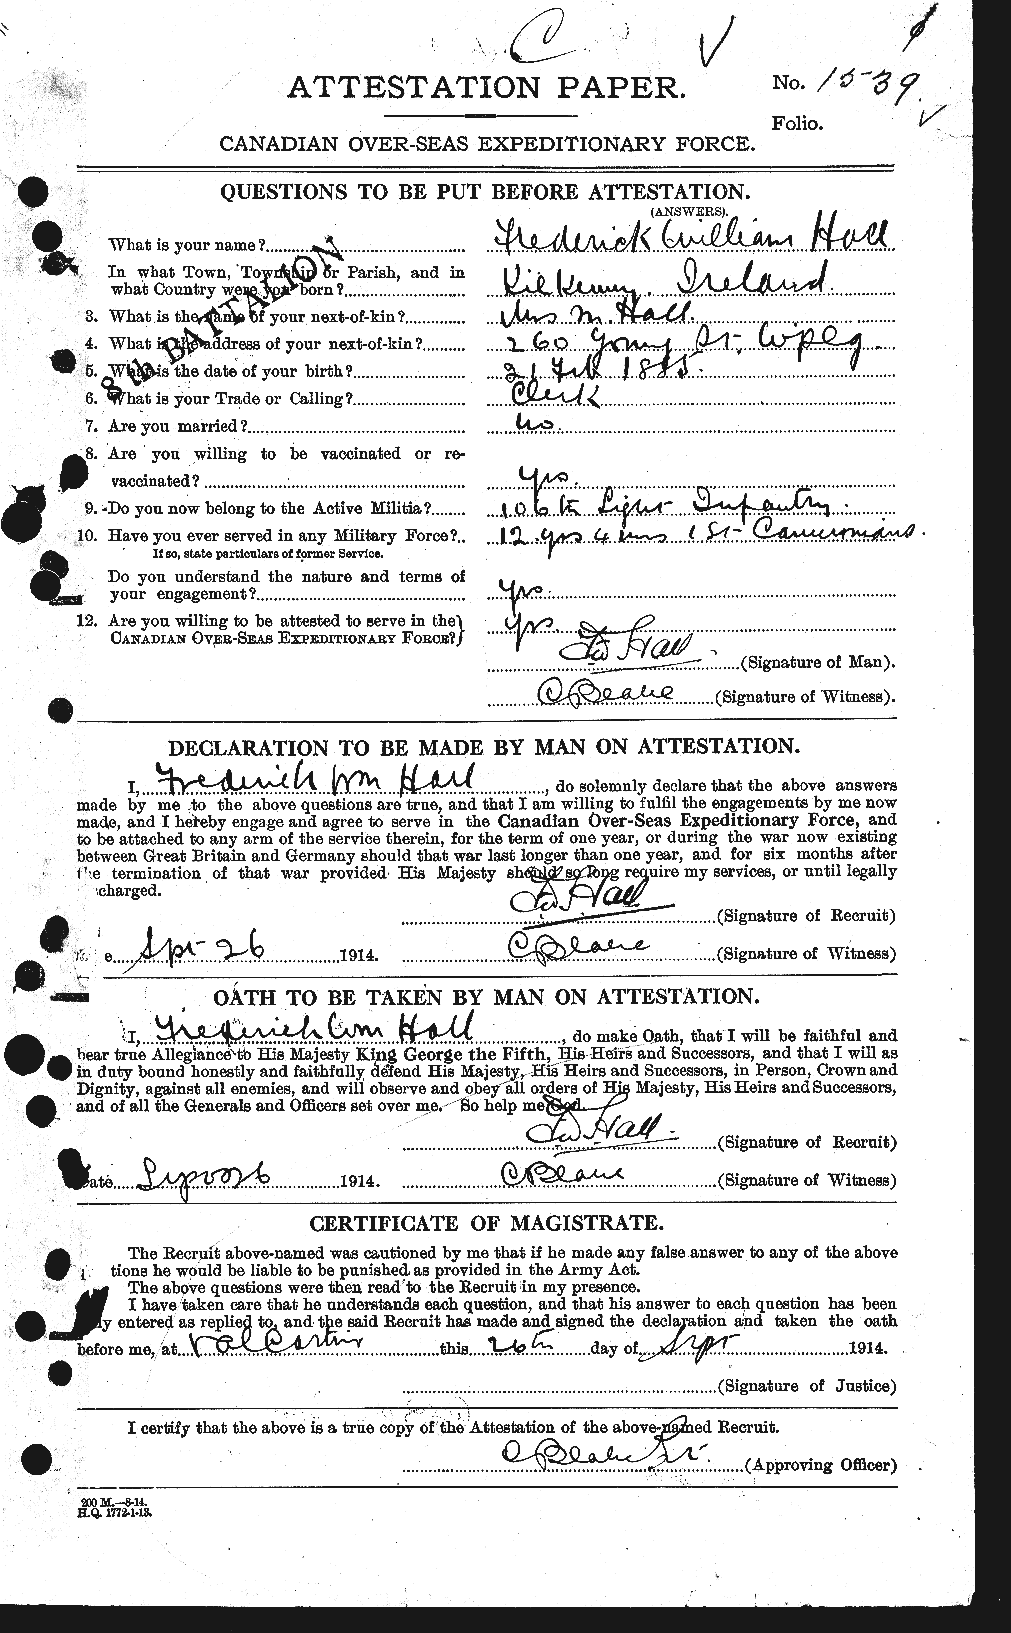 Personnel Records of the First World War - CEF 206284a